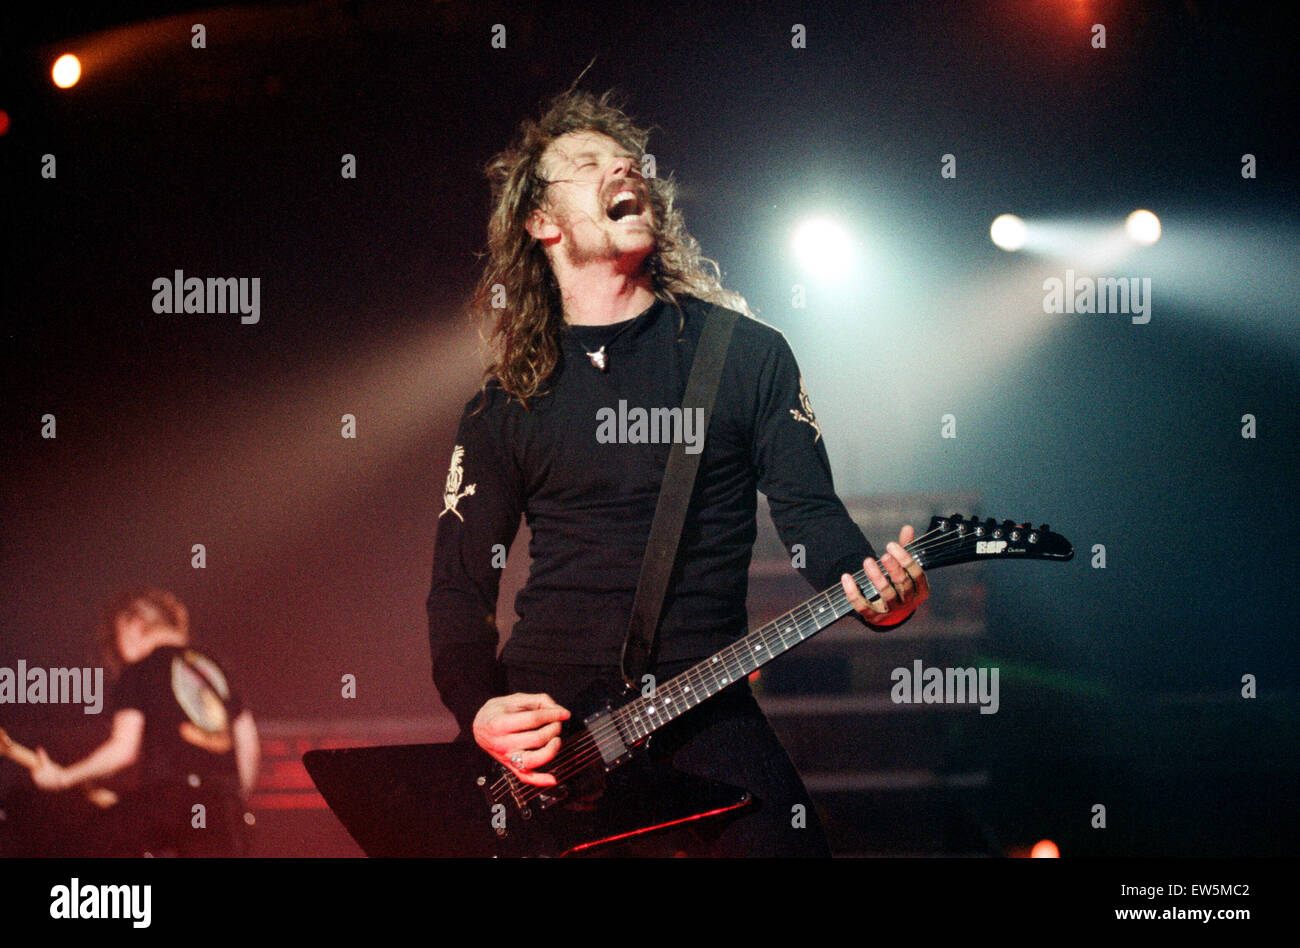 Metallica in concert at the NEC Arena, Birmingham. James Hetfield, lead singer and guitarist with the band. 4th November 1992. Stock Photo